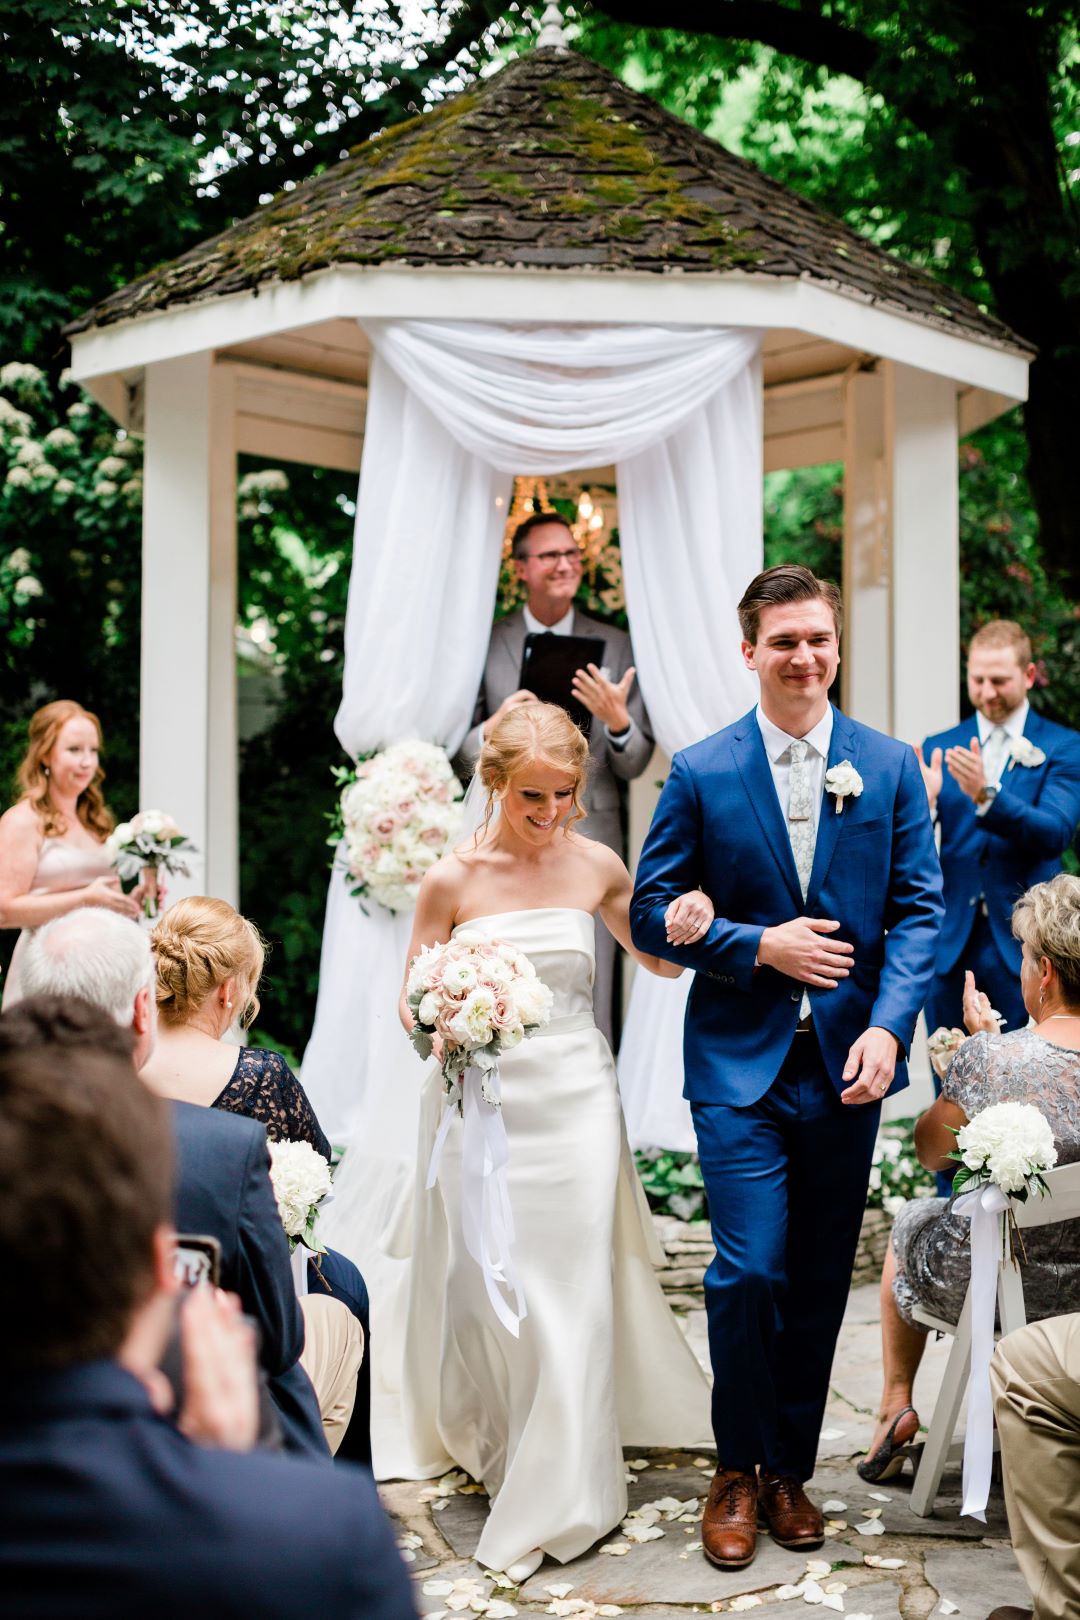 CJ's Off The Square | Bride and groom walking up the aisle as newlyweds